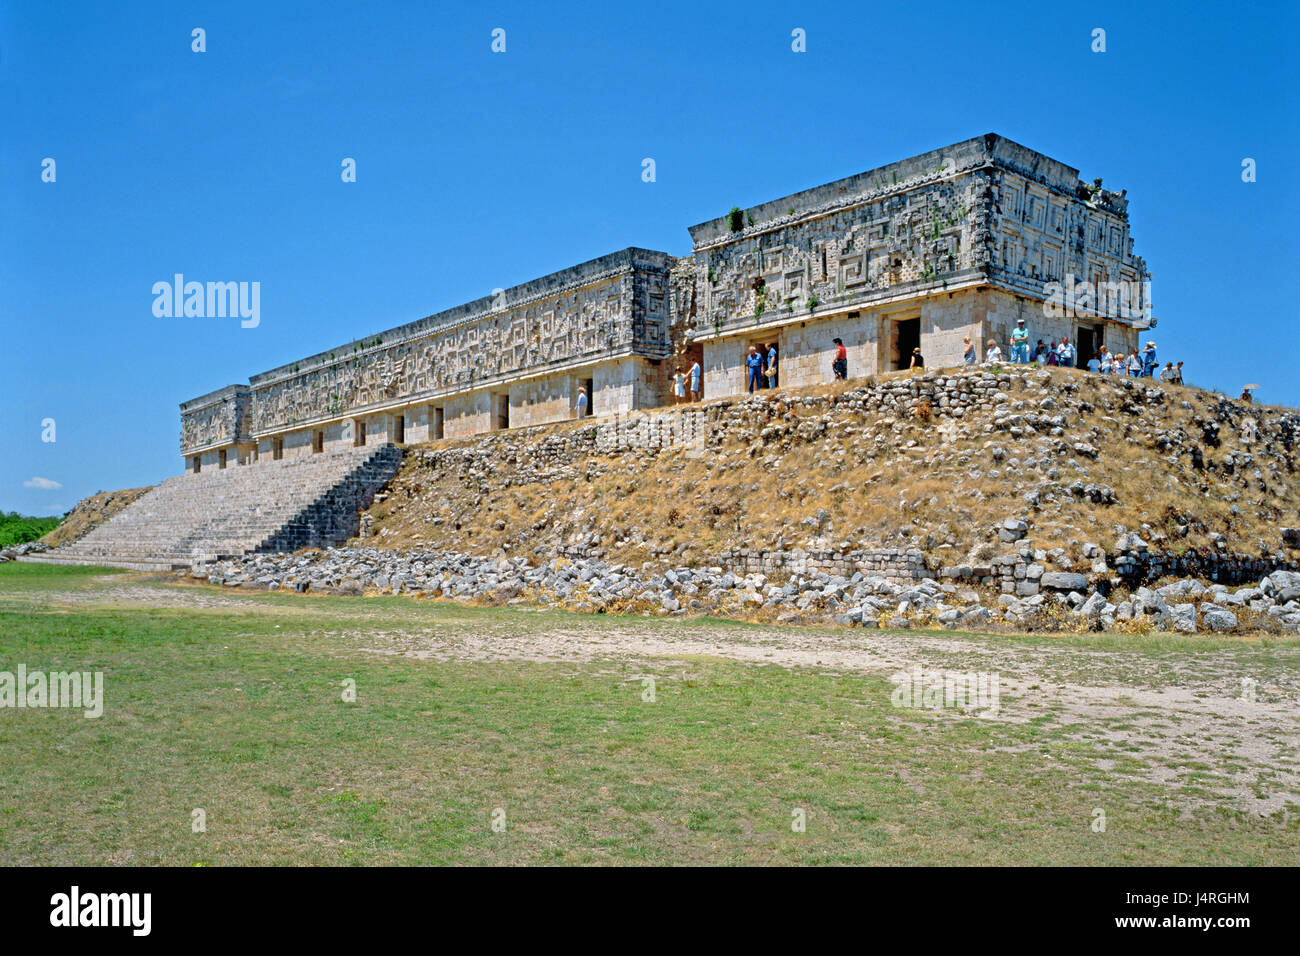 Mexico, Yucatan, Uxmal, governor's palace, tourist, palace, building, outside, people, tour group, tourism, place of interest, sky, blue, Stock Photo